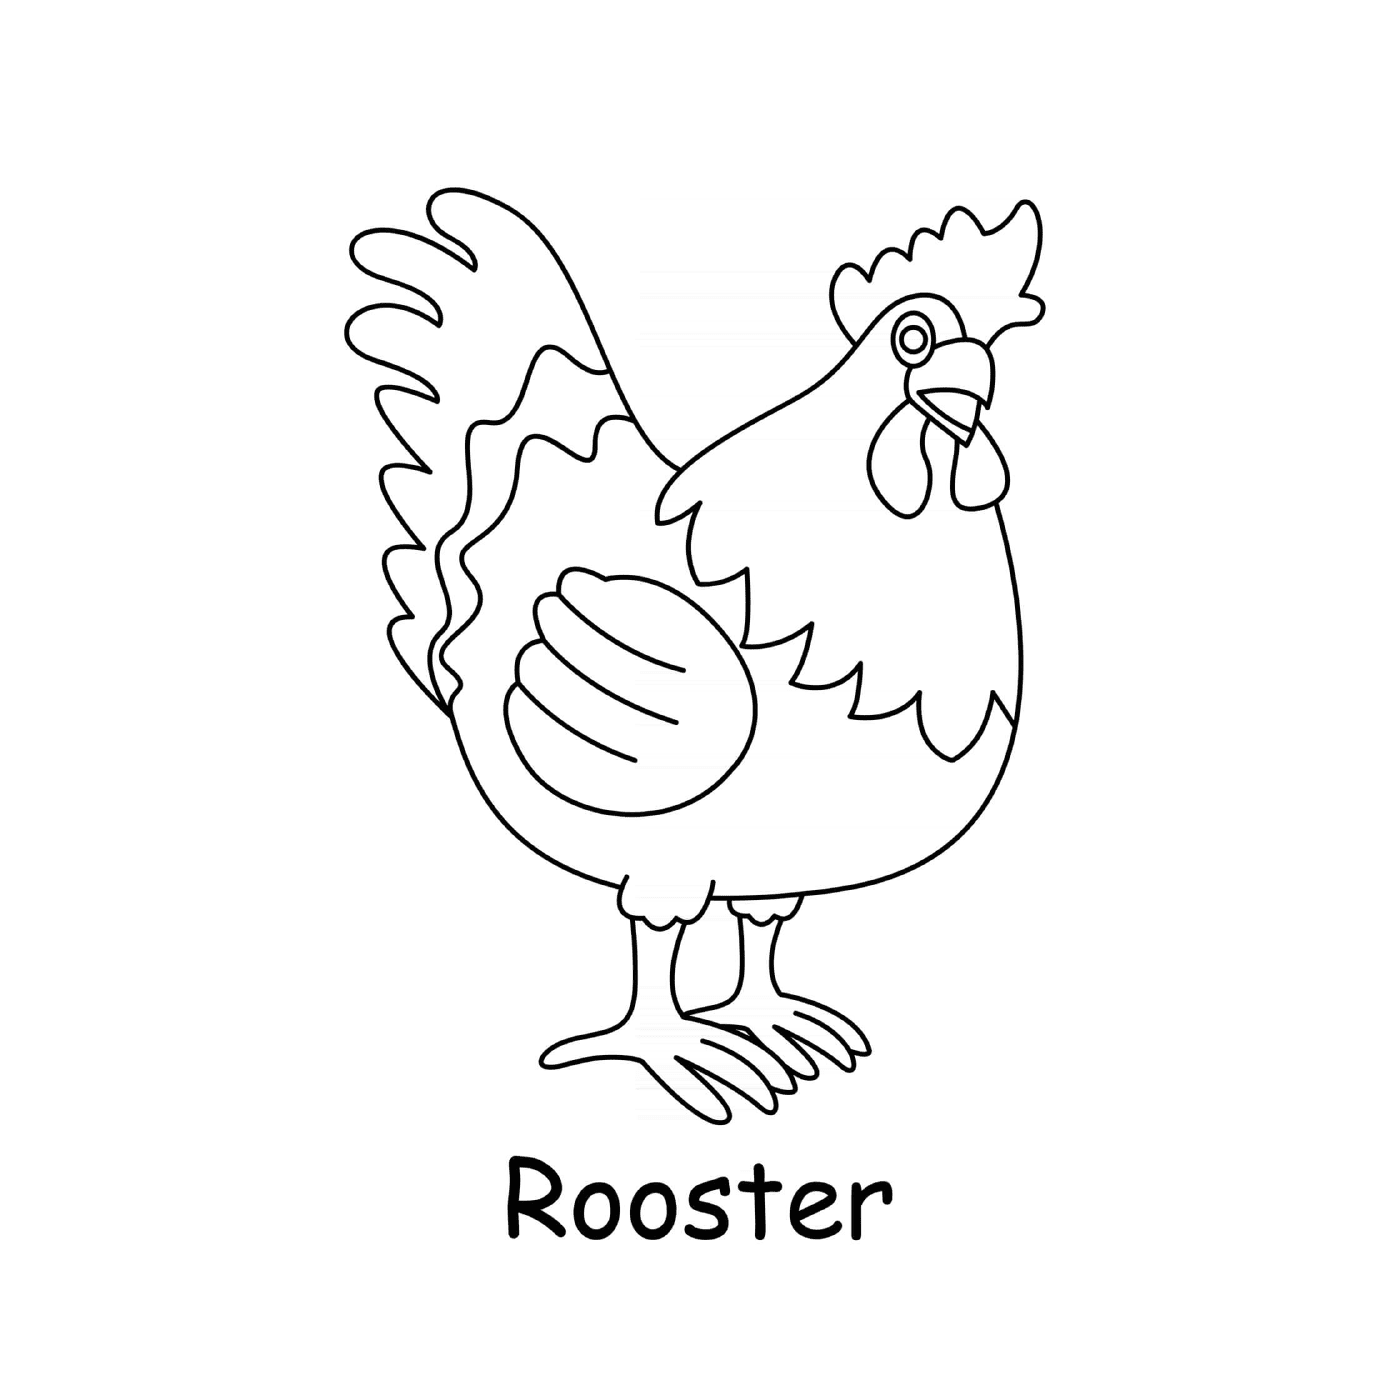  Rooster male chicken 